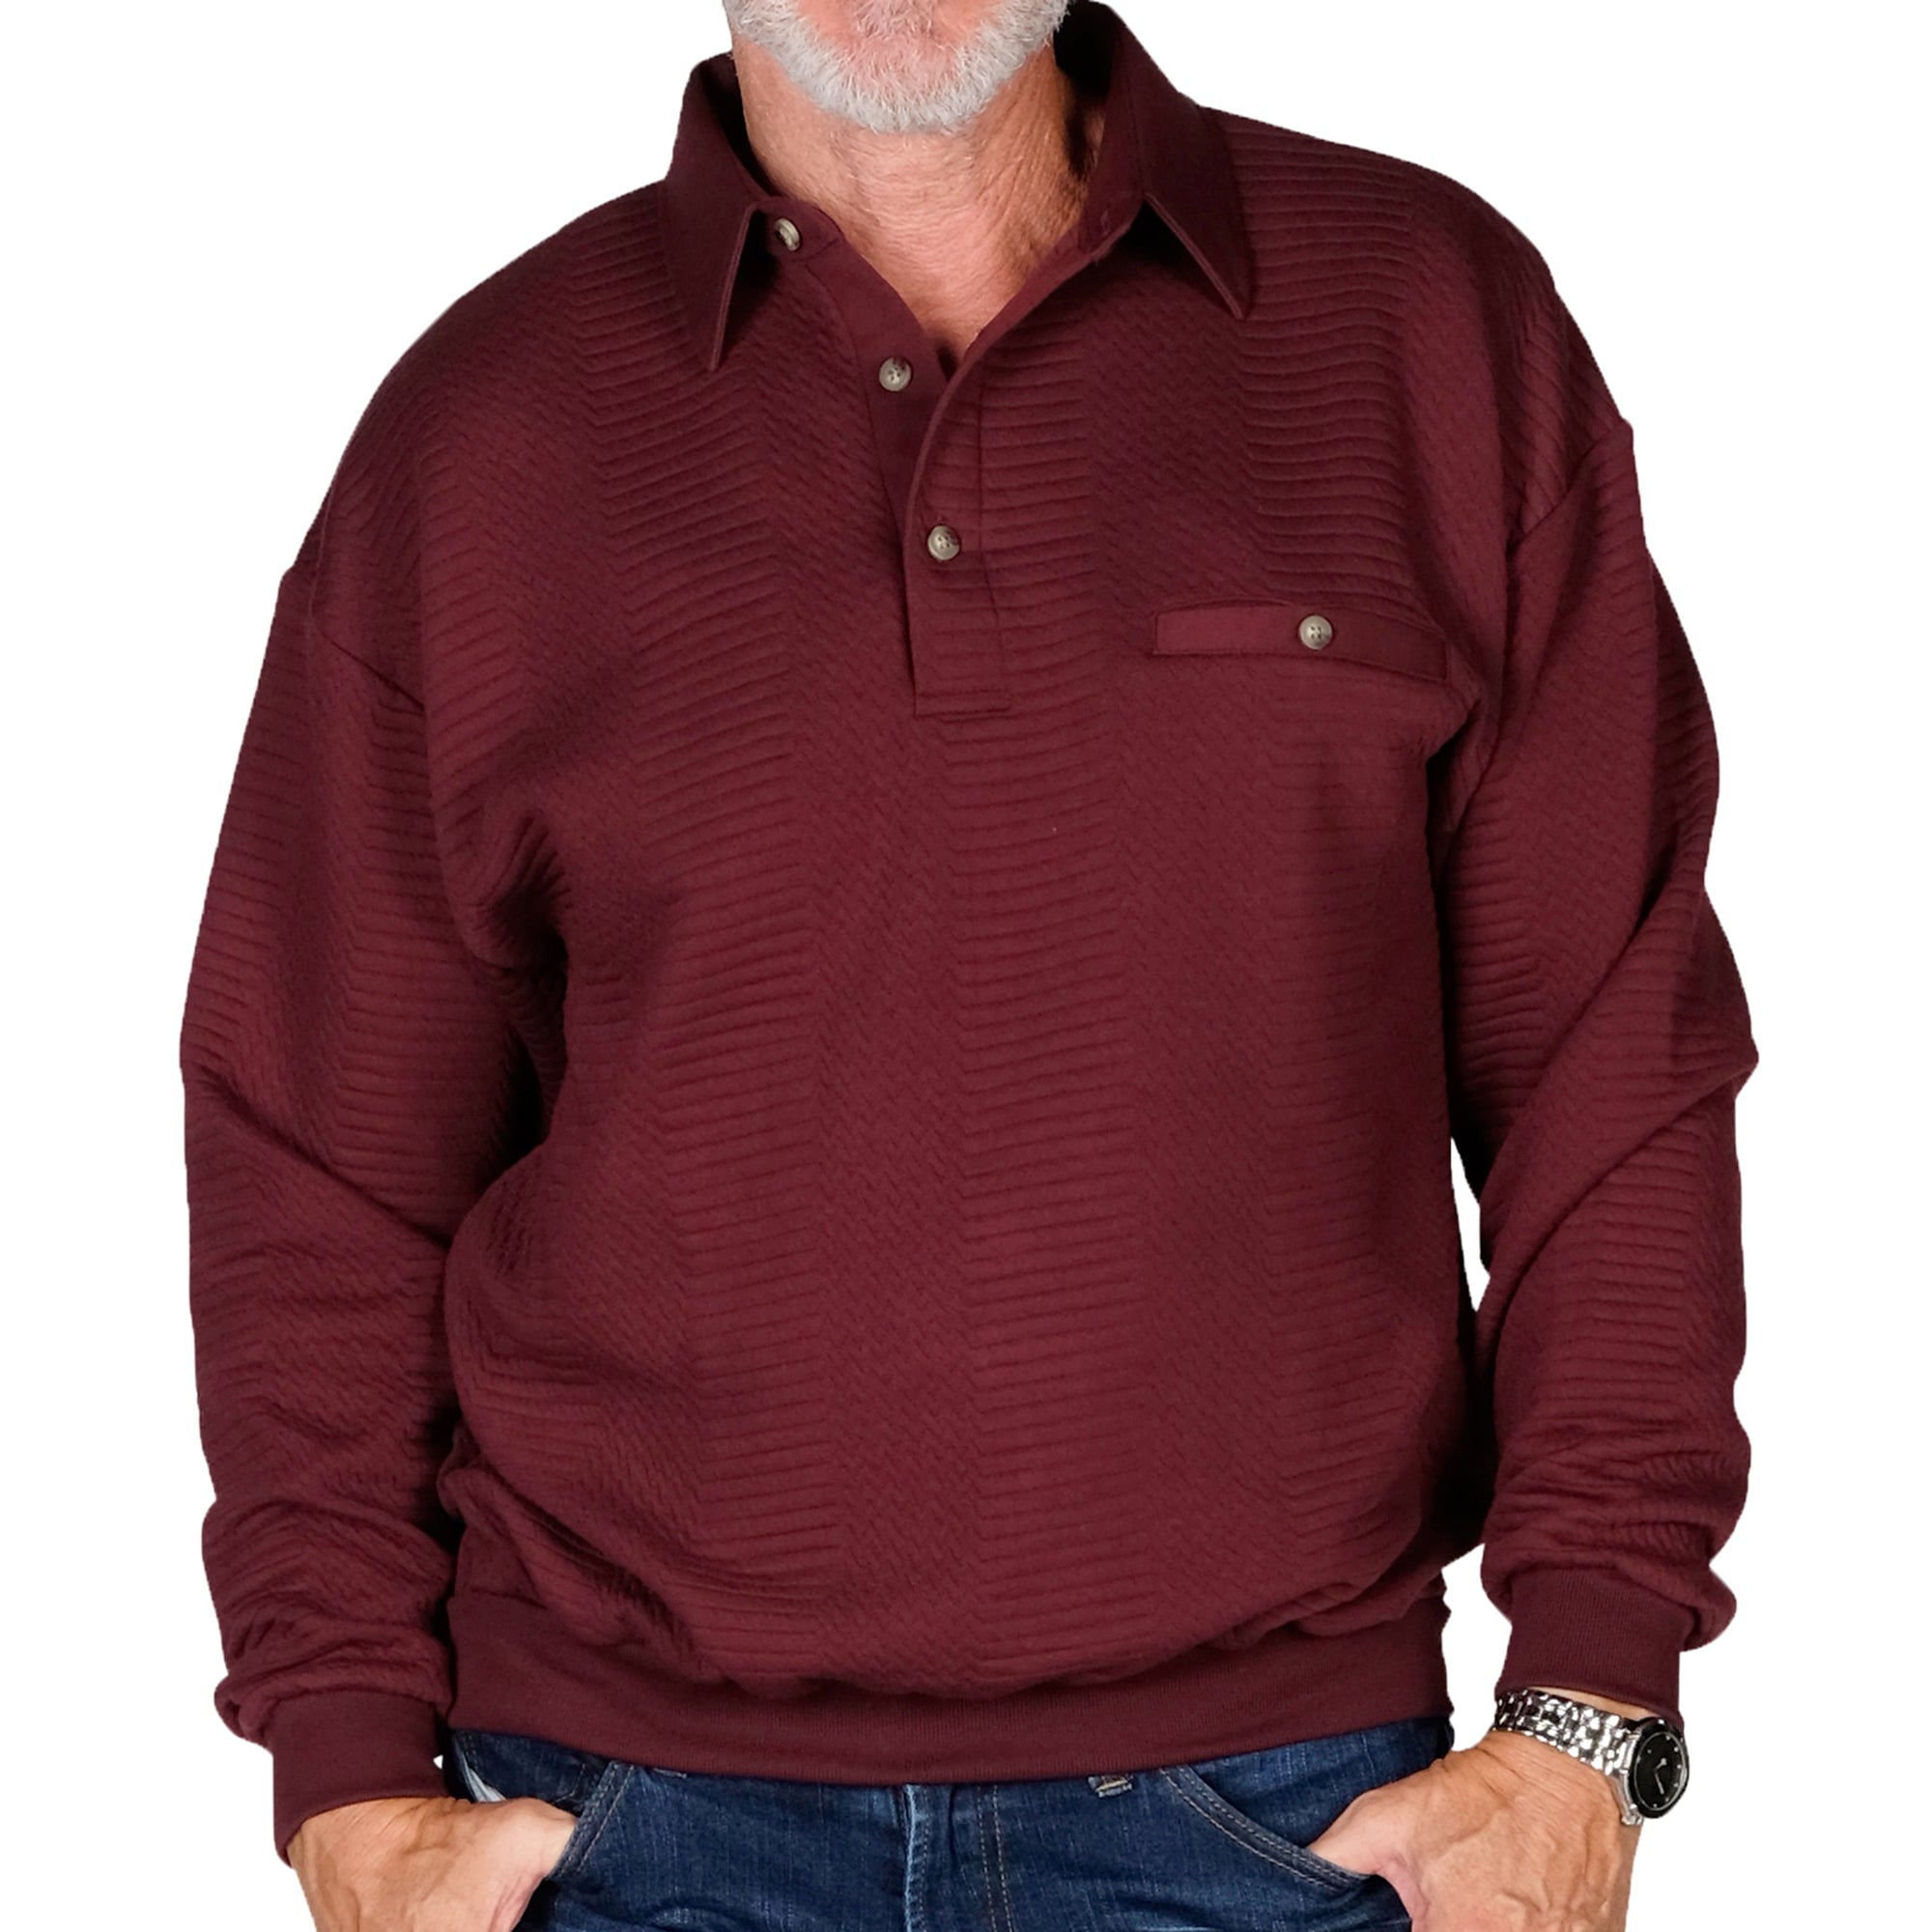 LD Sport Solid Textured Long Sleeve Banded Bottom Shirt - 6094-950 - Burgundy - Big and Tall